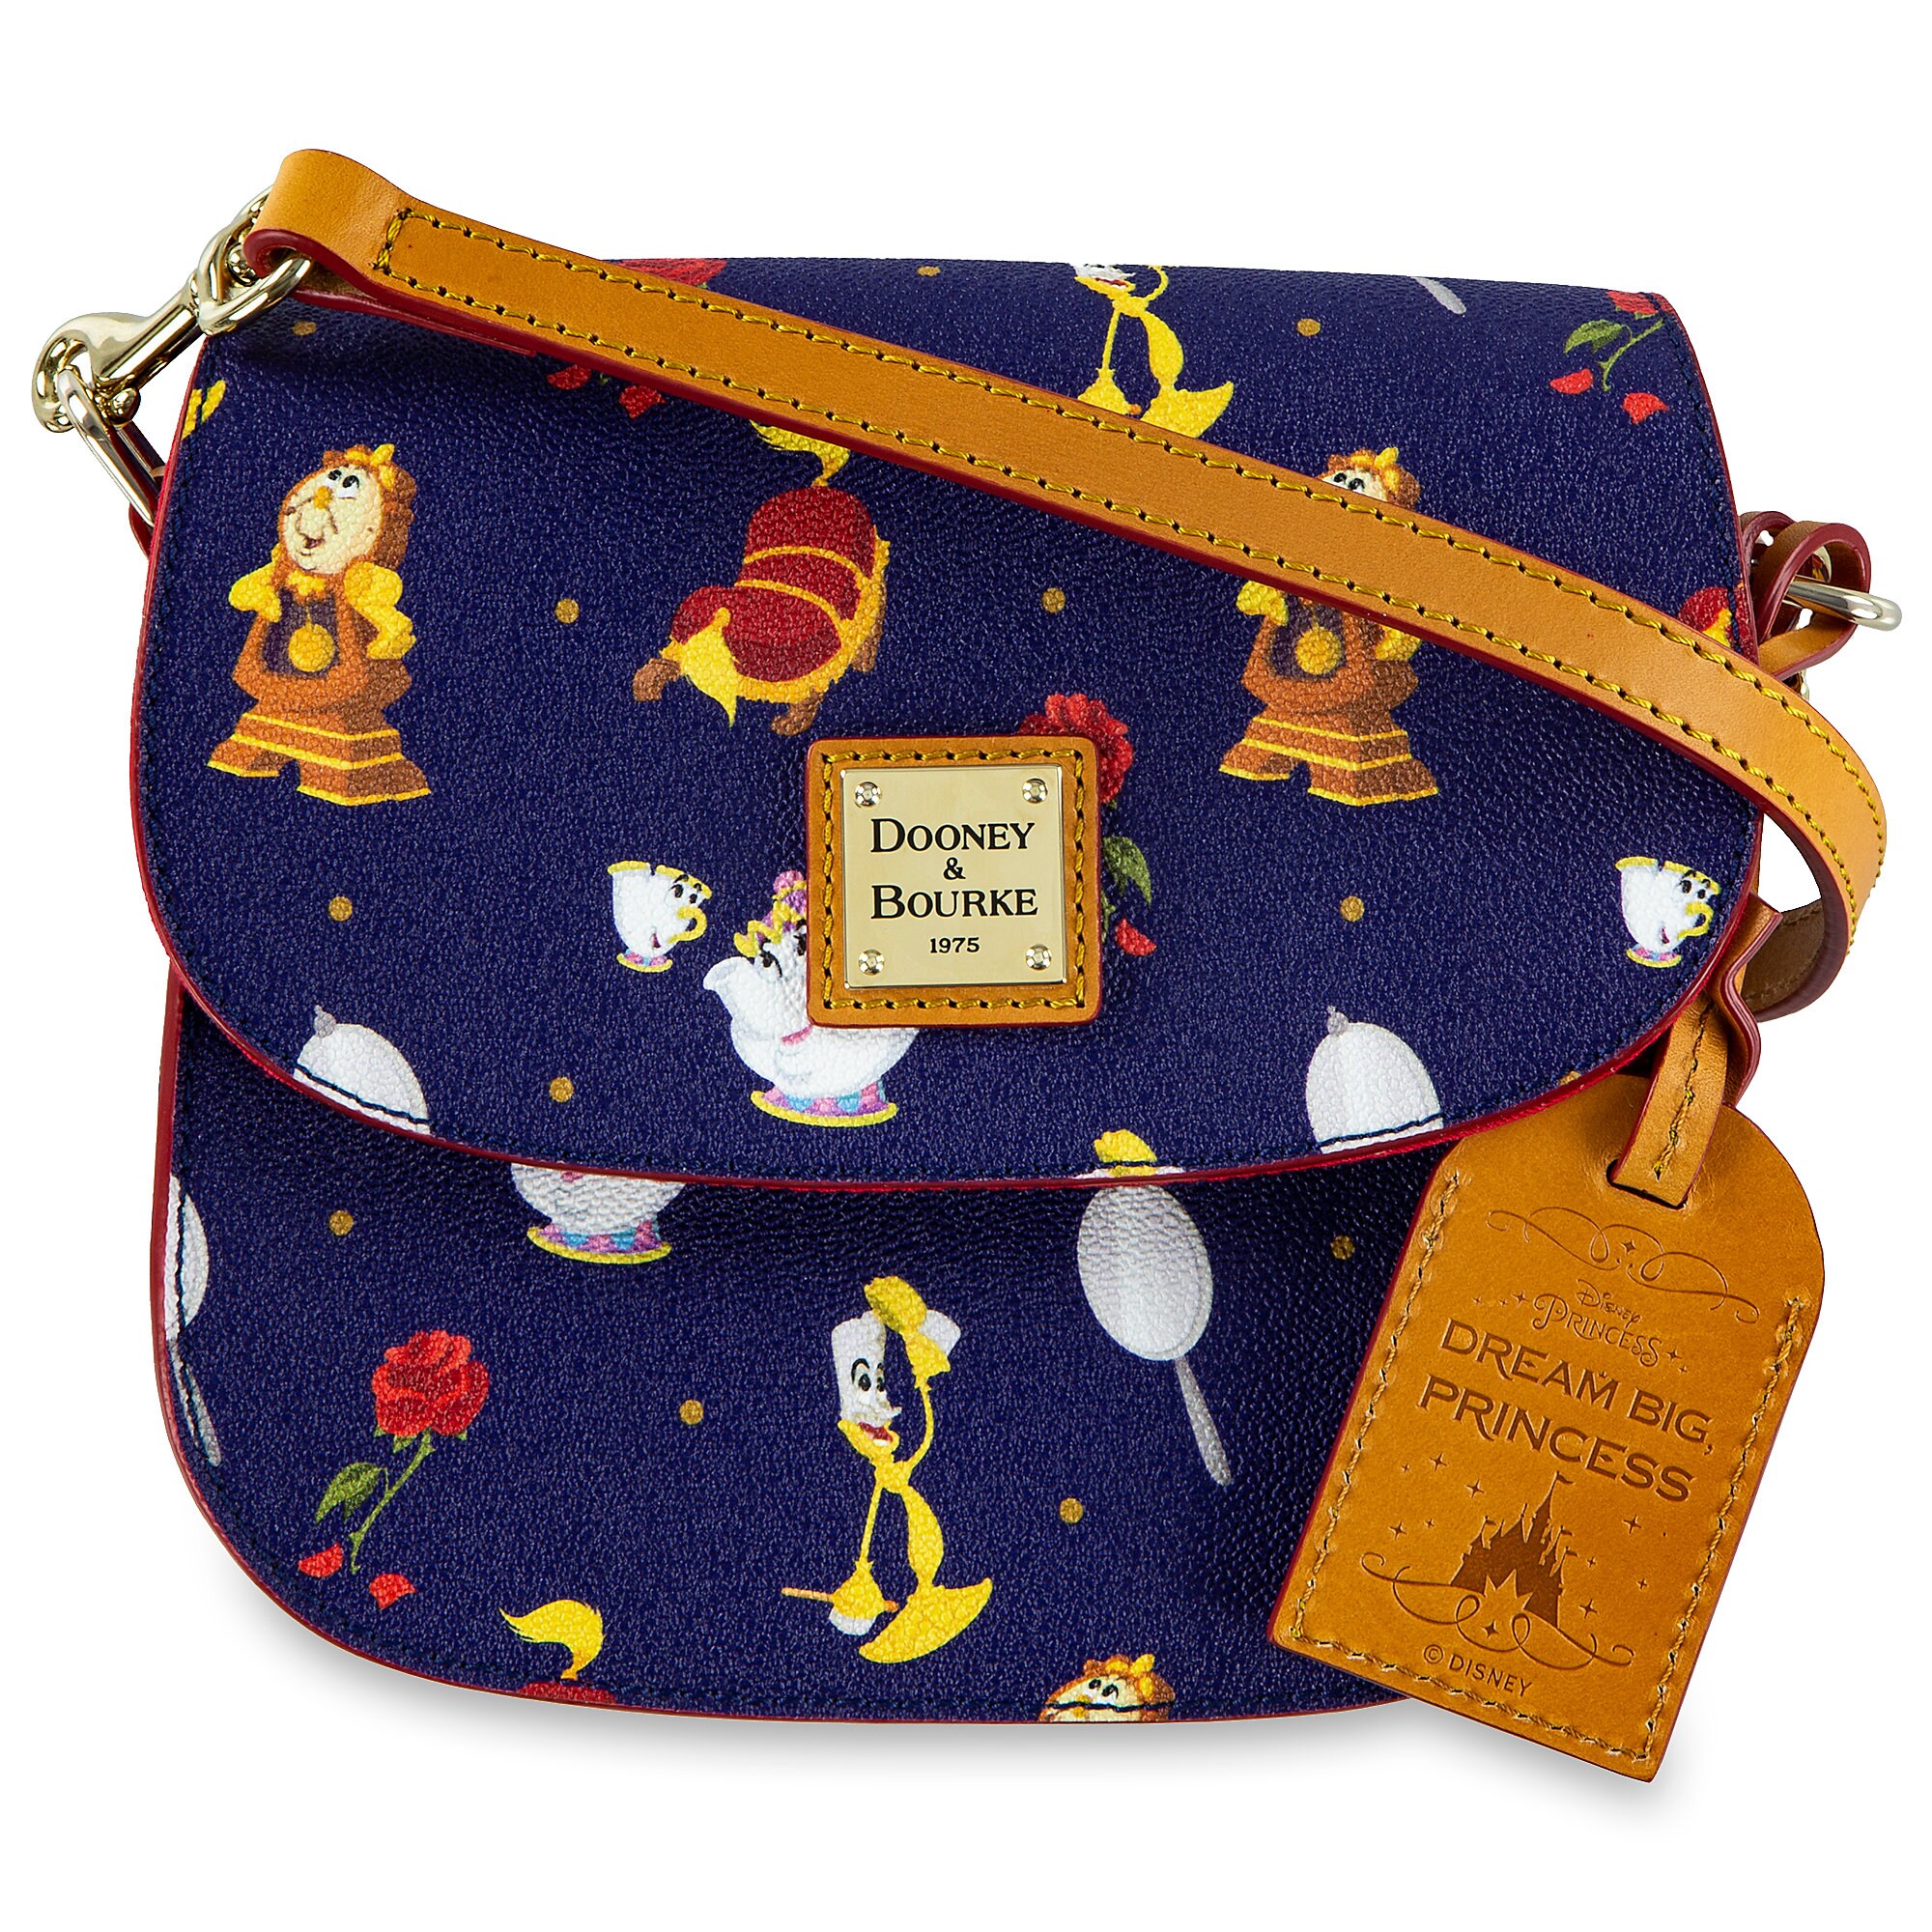 Beauty and the Beast Crossbody Bag by Dooney & Bourke released today ...